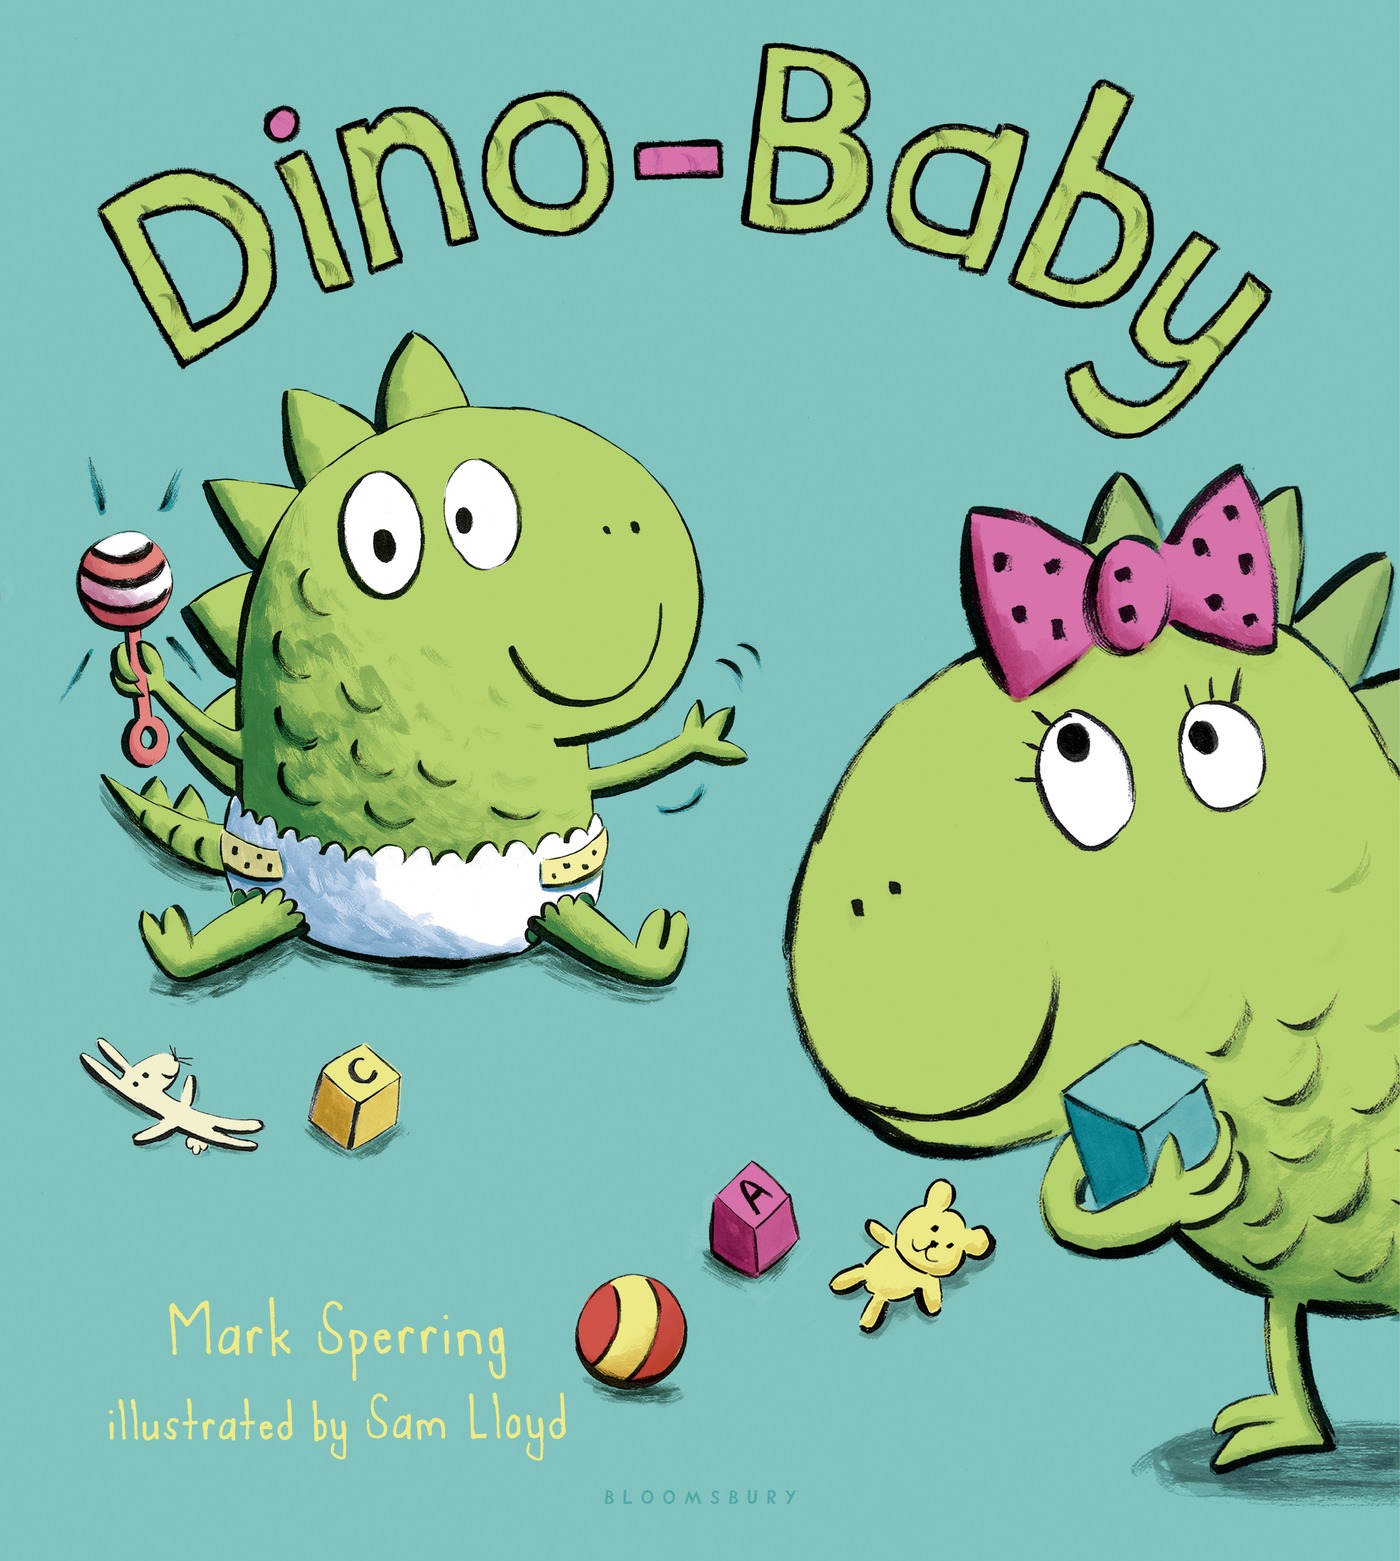 Dino-baby cover image